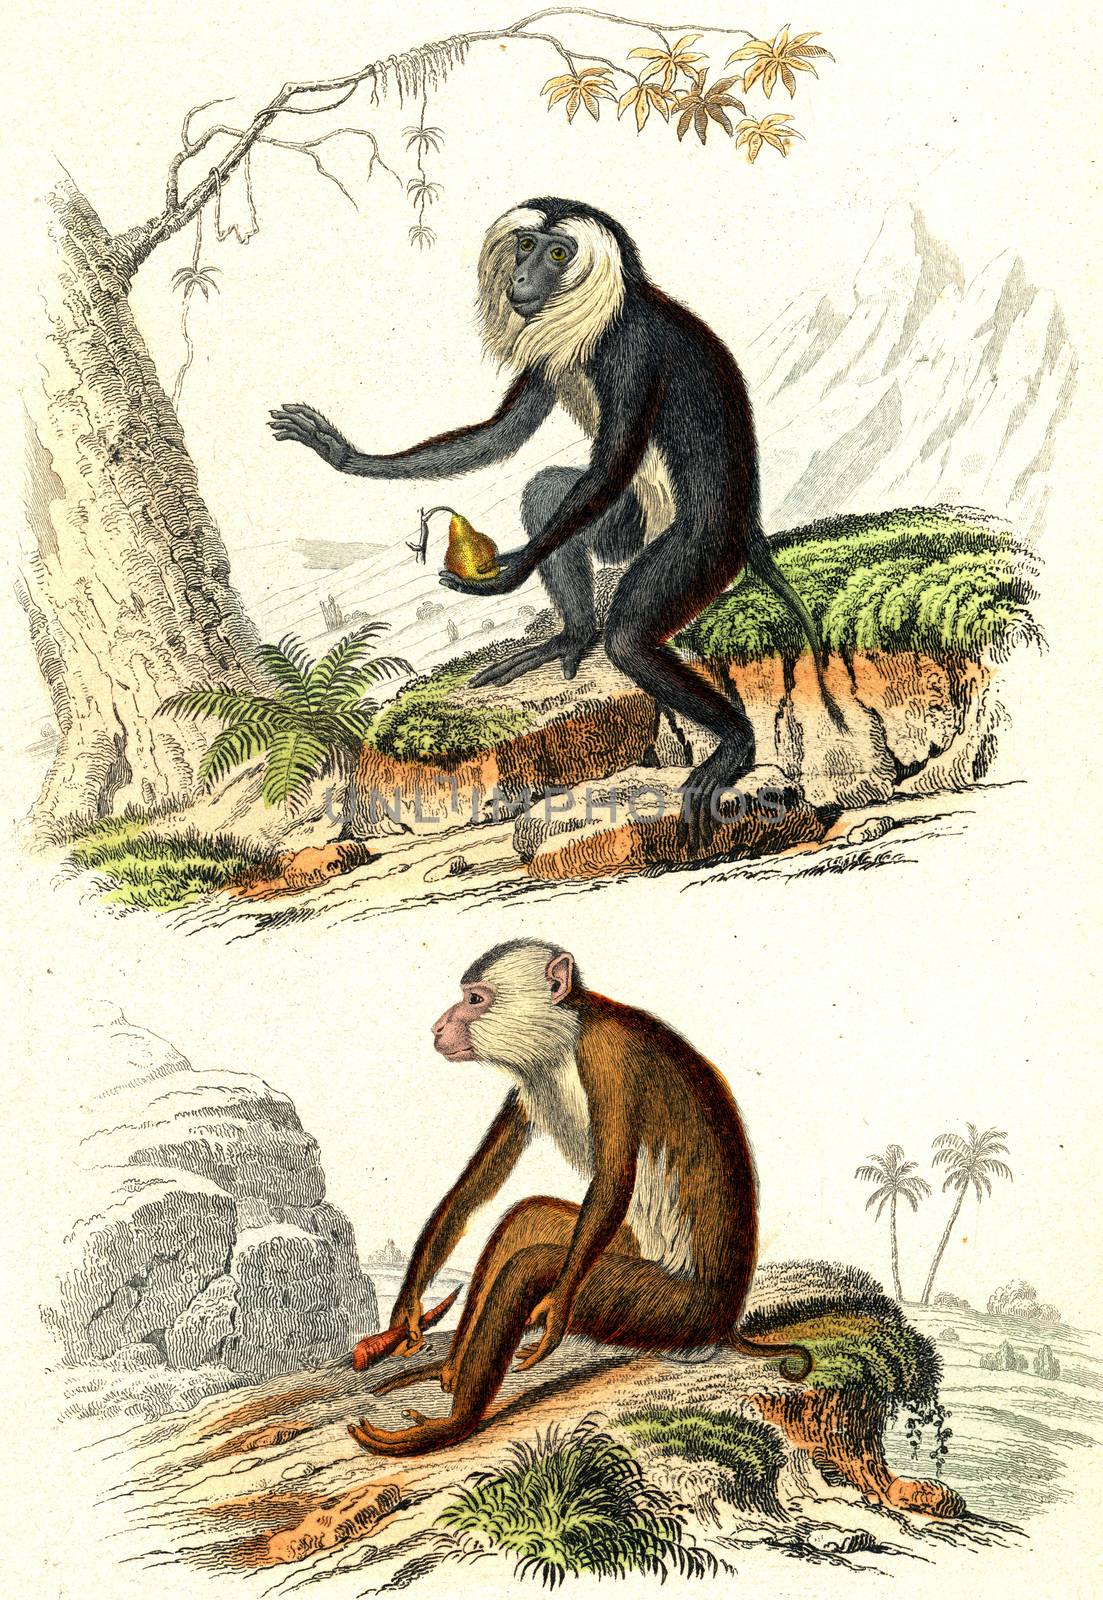 Lion-tailed macaque, The maimon, vintage engraved illustration. From Buffon Complete Work.
